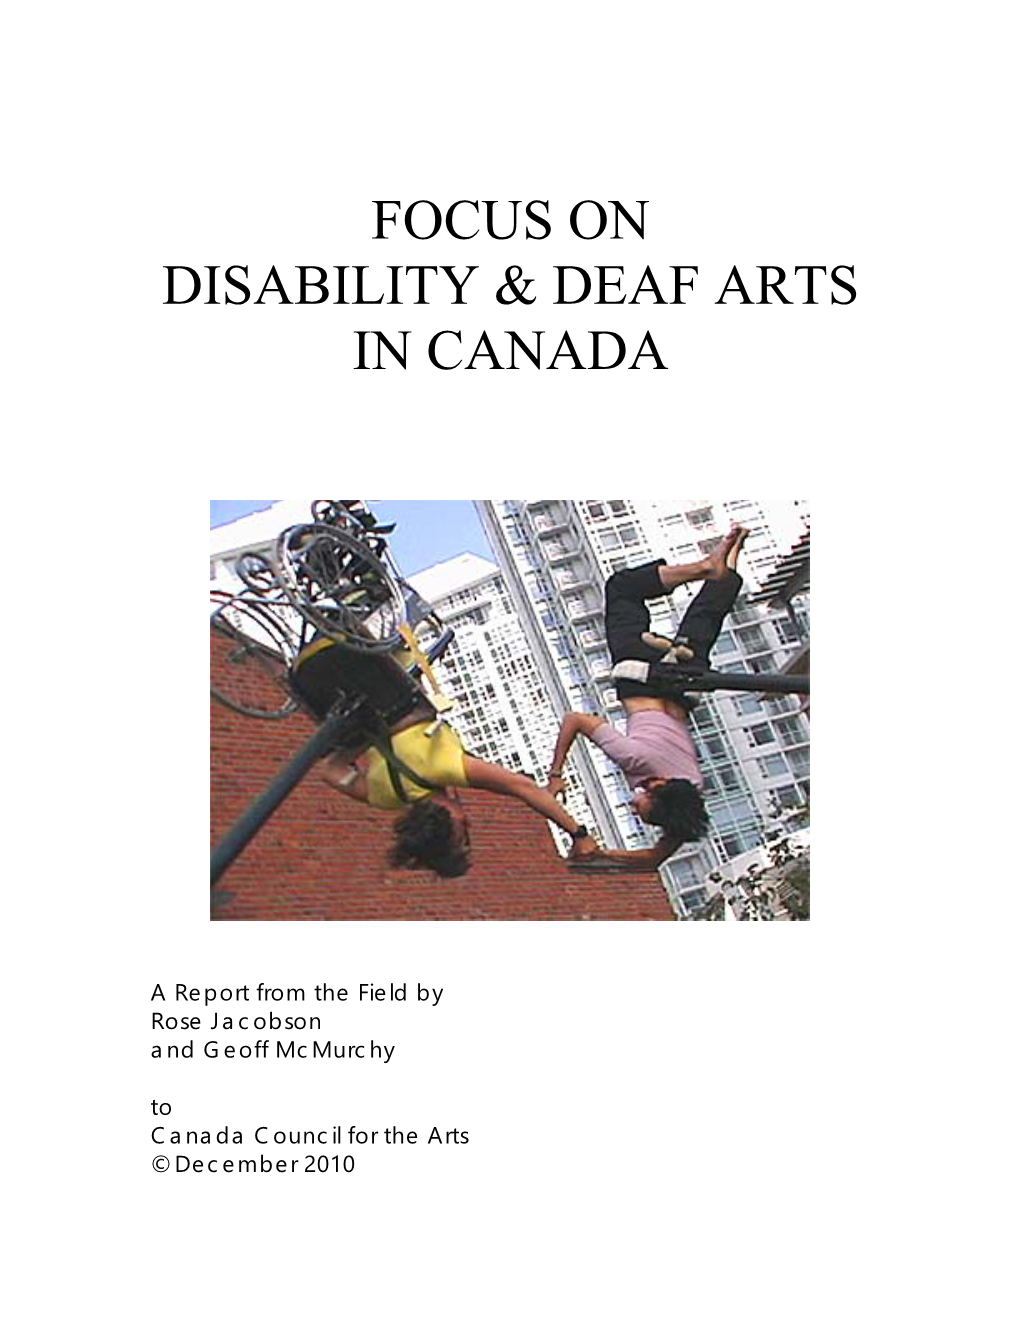 Focus on Disability & Deaf Arts in Canada